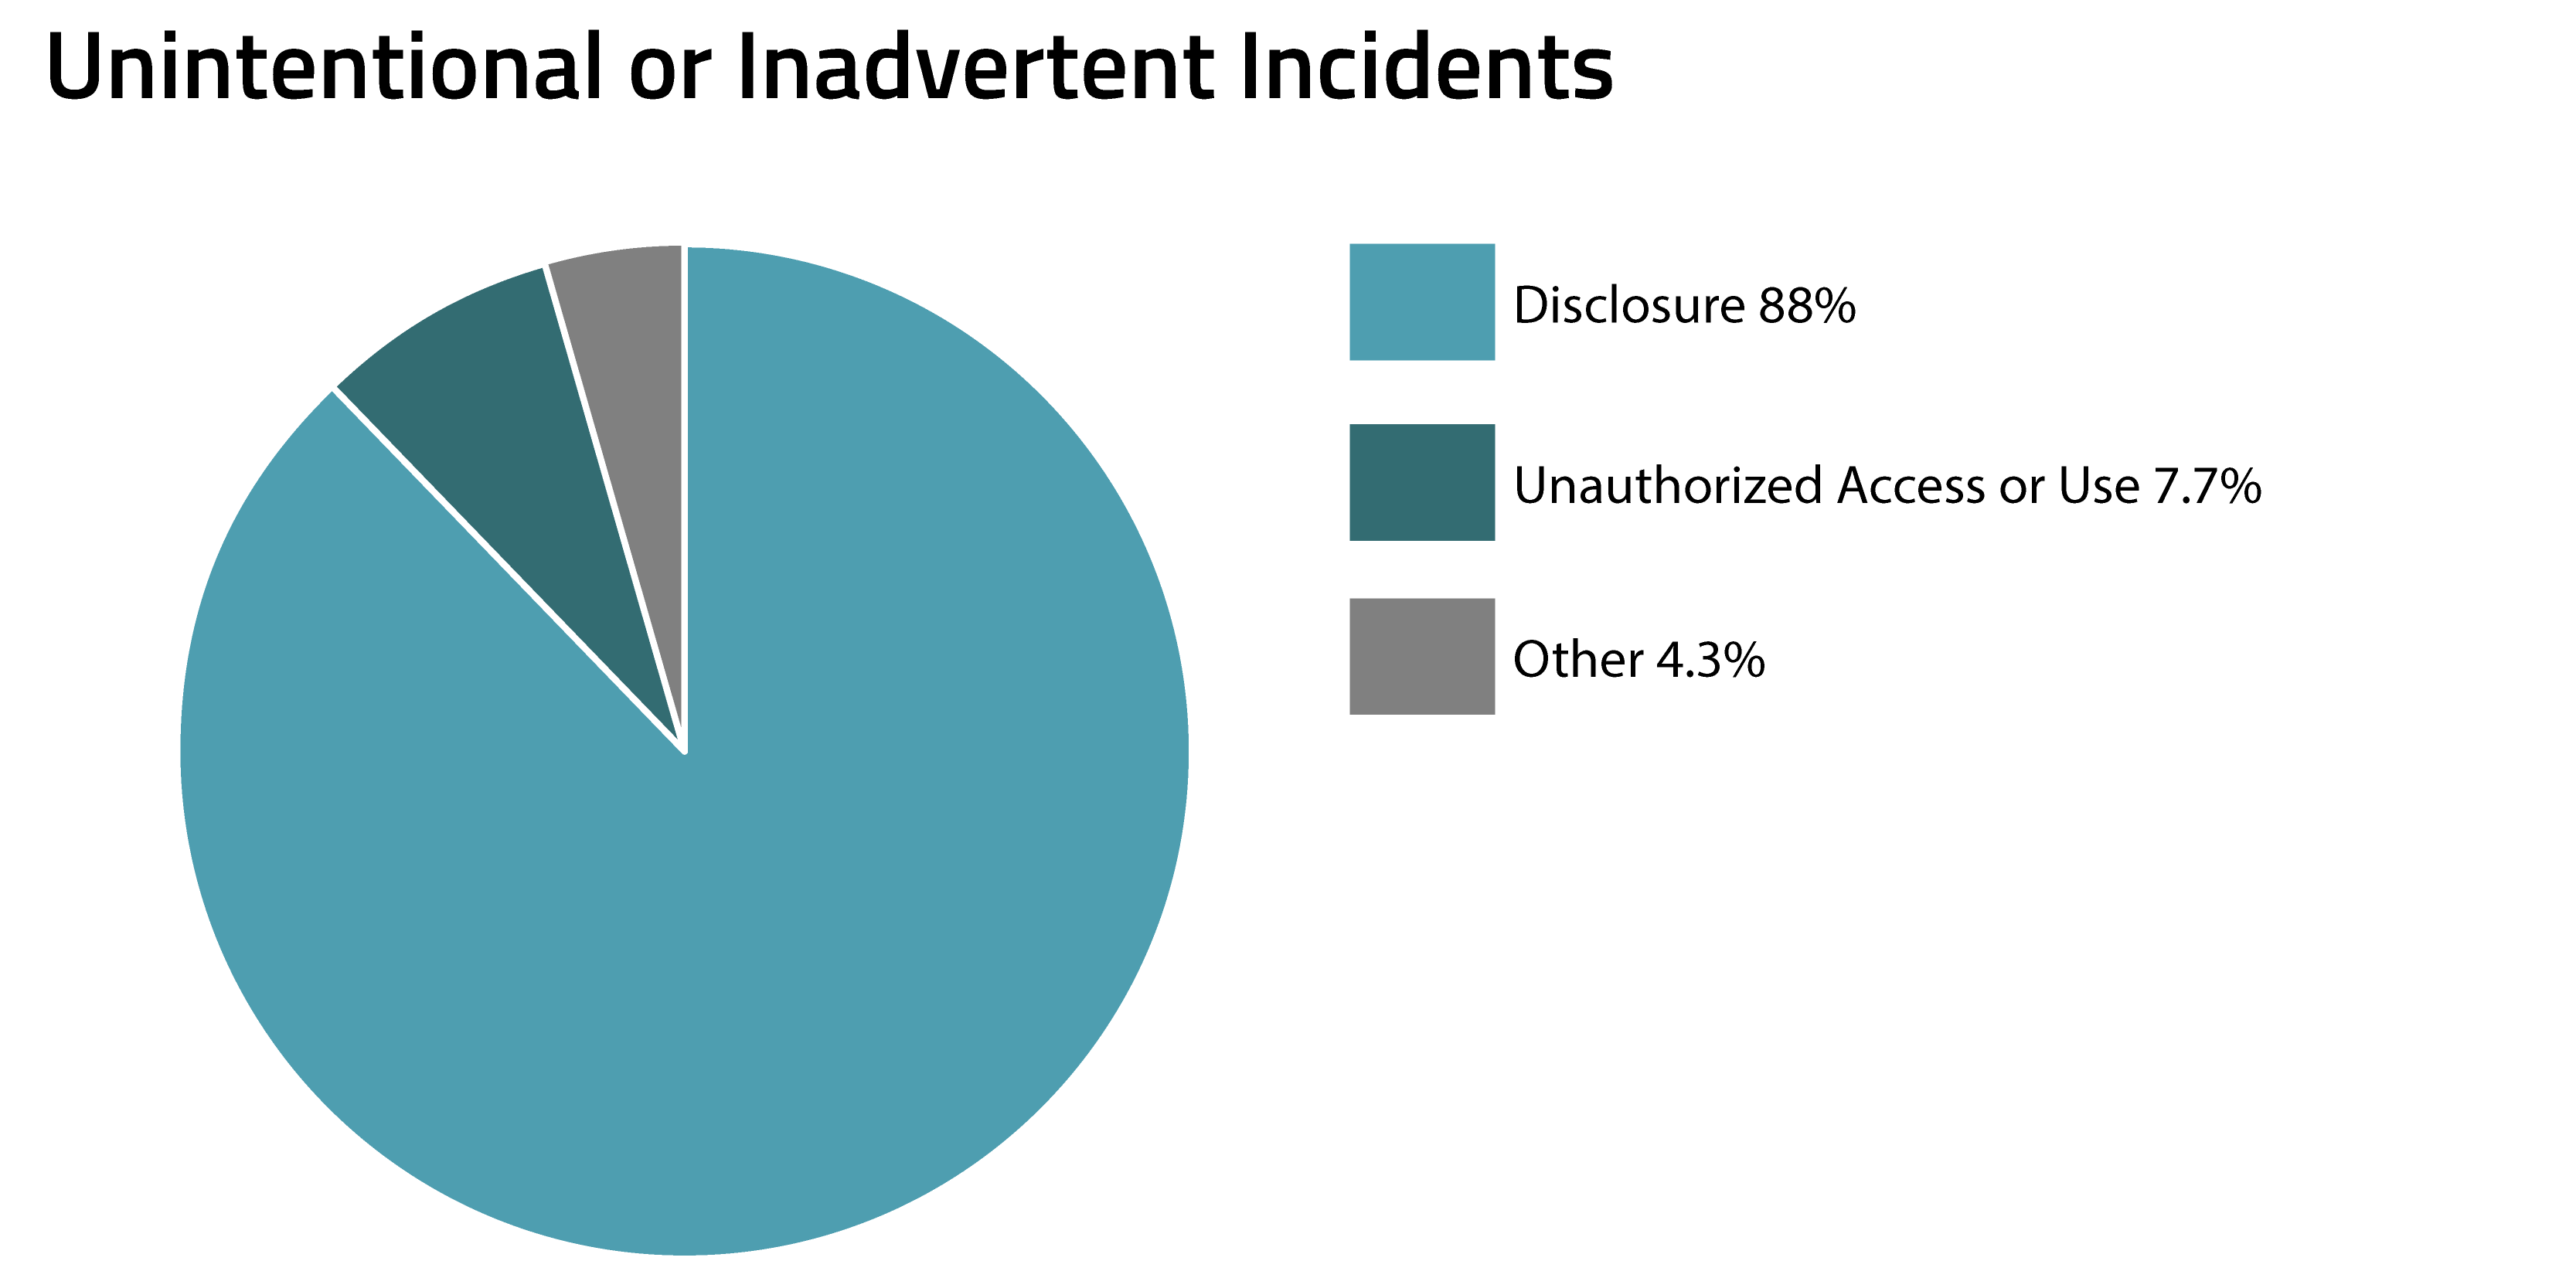 Benchmarking Data - Unintentional, Inadvertent incidents